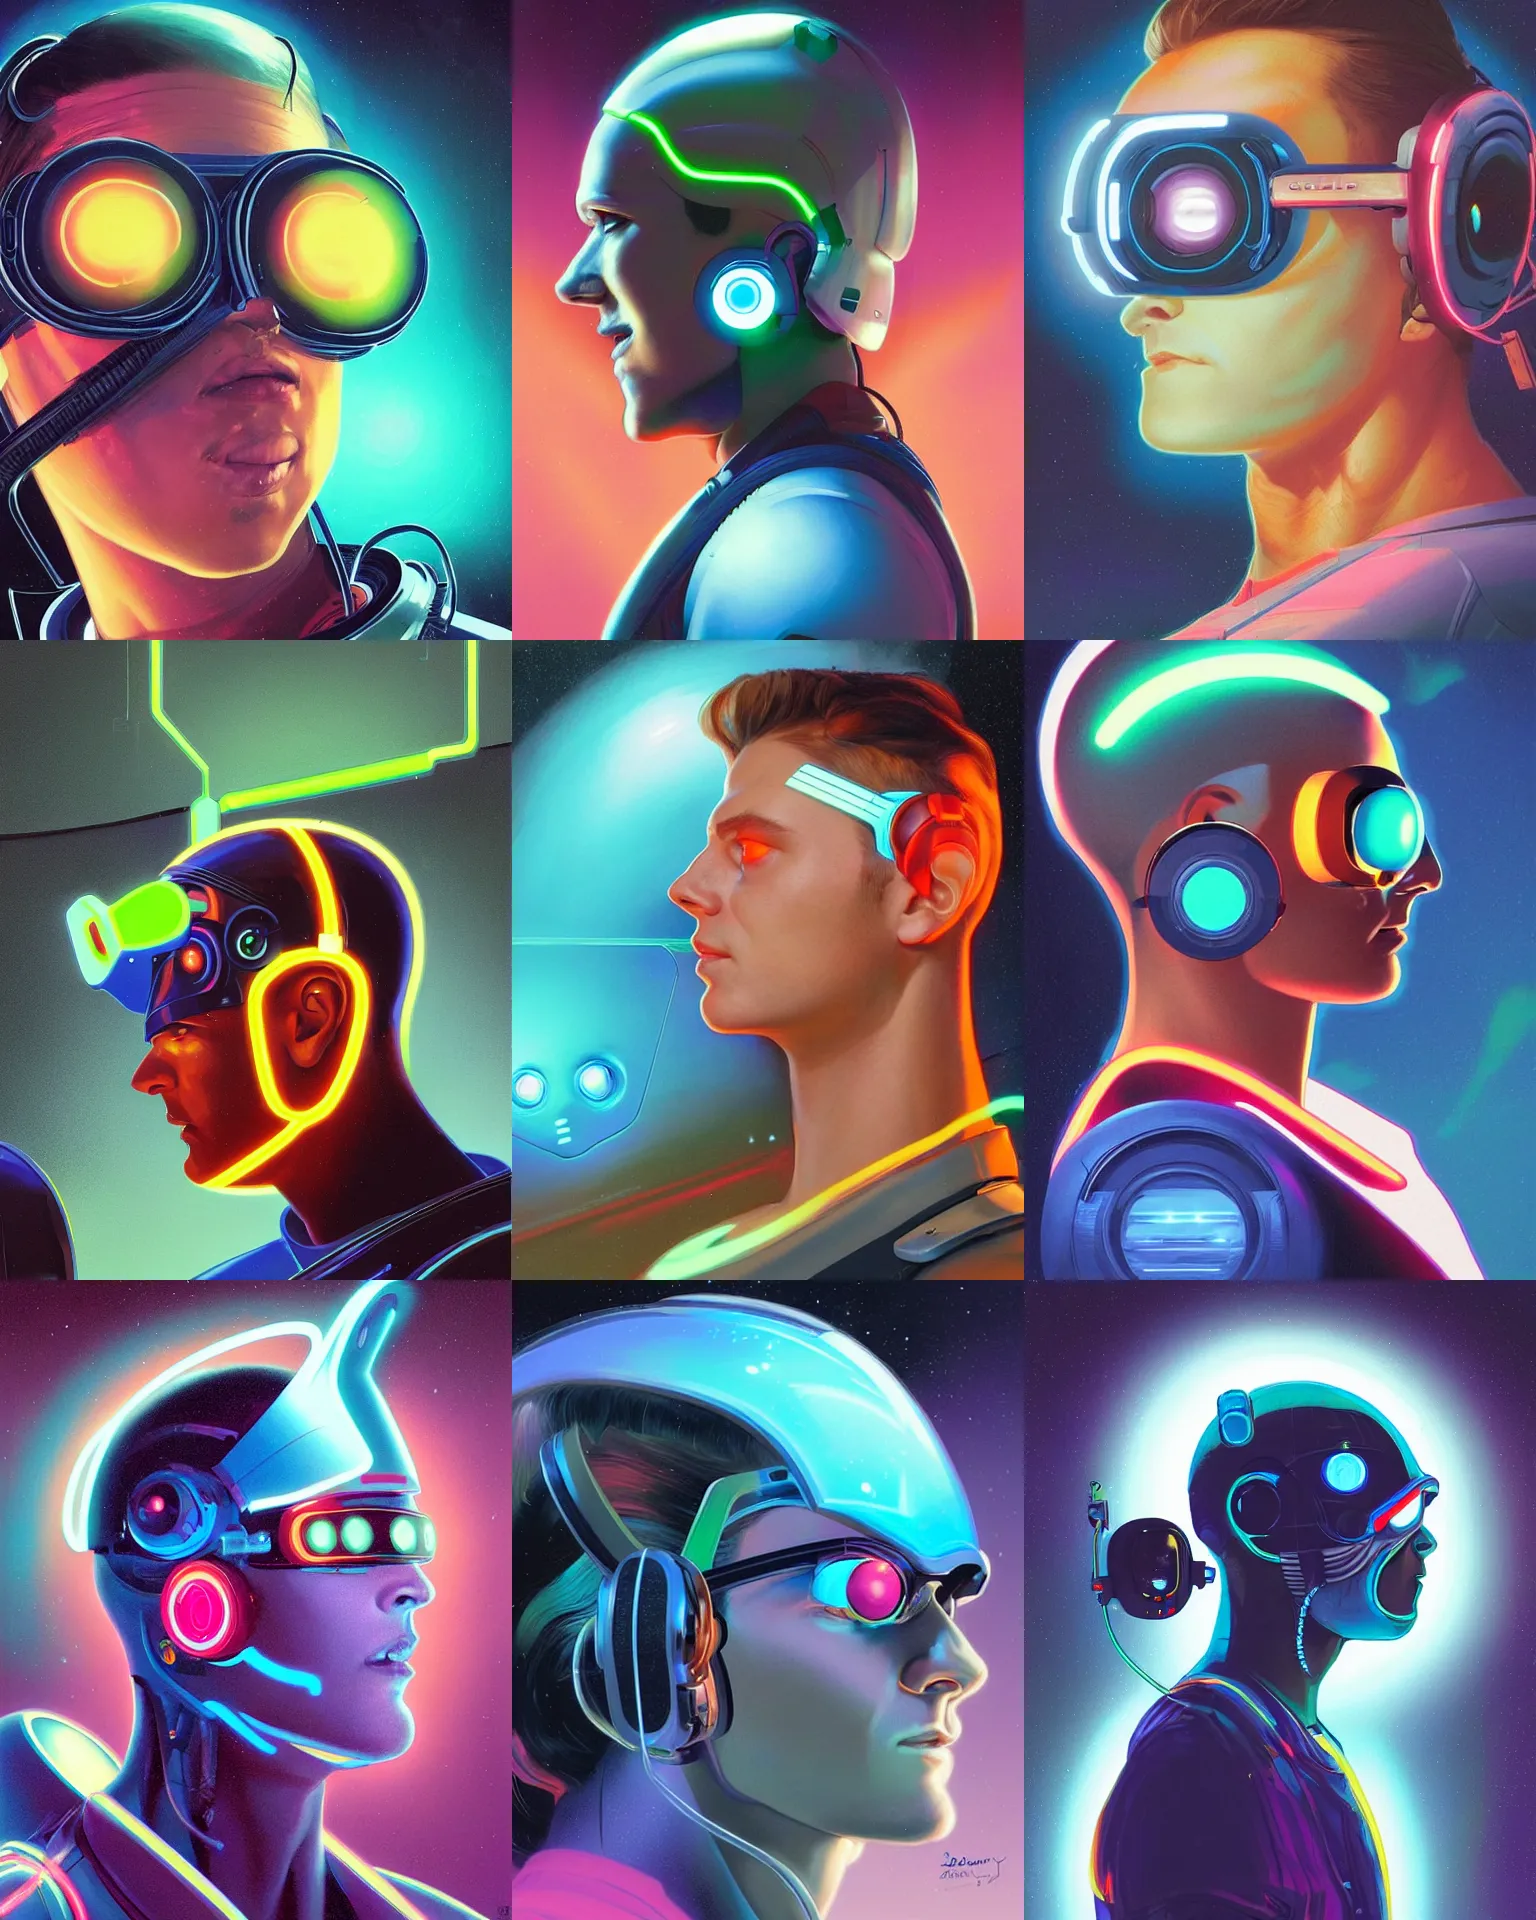 Prompt: side view future coder man, sleek cyclops display over eyes and glowing headset, neon accents, holographic colors, desaturated headshot portrait digital painting by dean cornwall, rhads, john berkey, tom whalen, alex grey, alphonse mucha, donoto giancola, astronaut cyberpunk electric lights profile